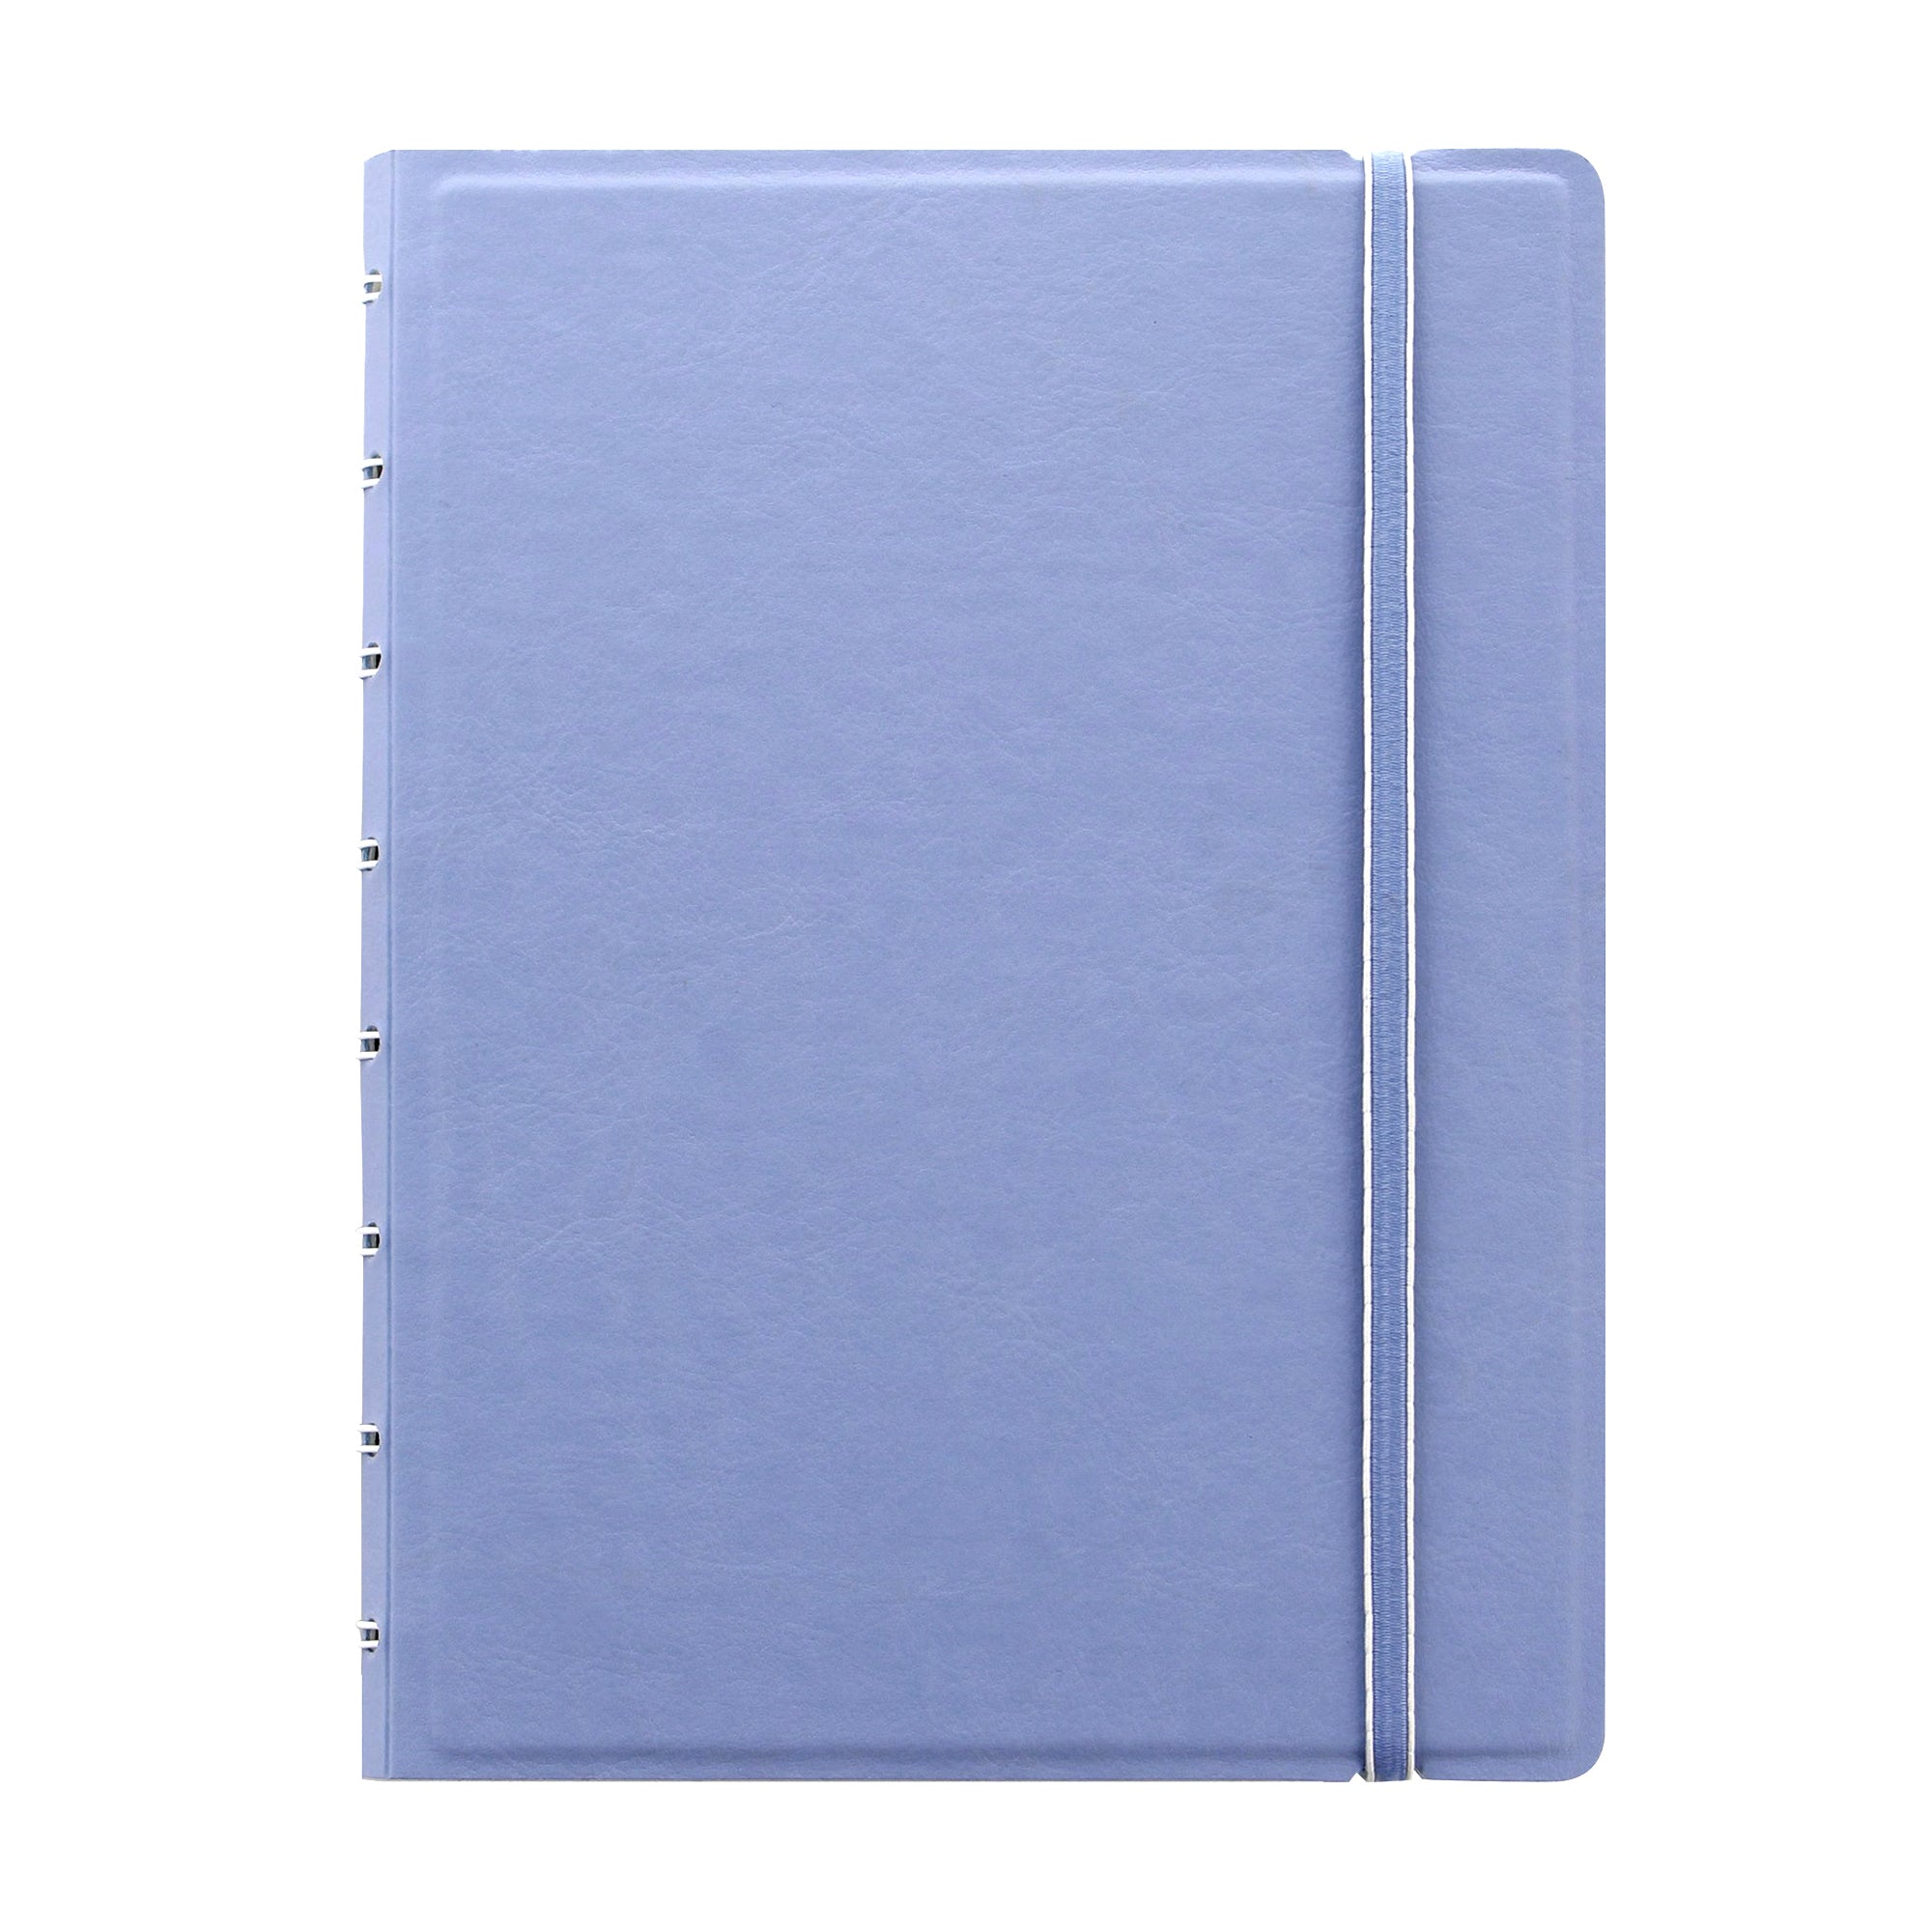 filofax-notebook-f-to-a5-righe-56-pag-blu-pastello-similpelle